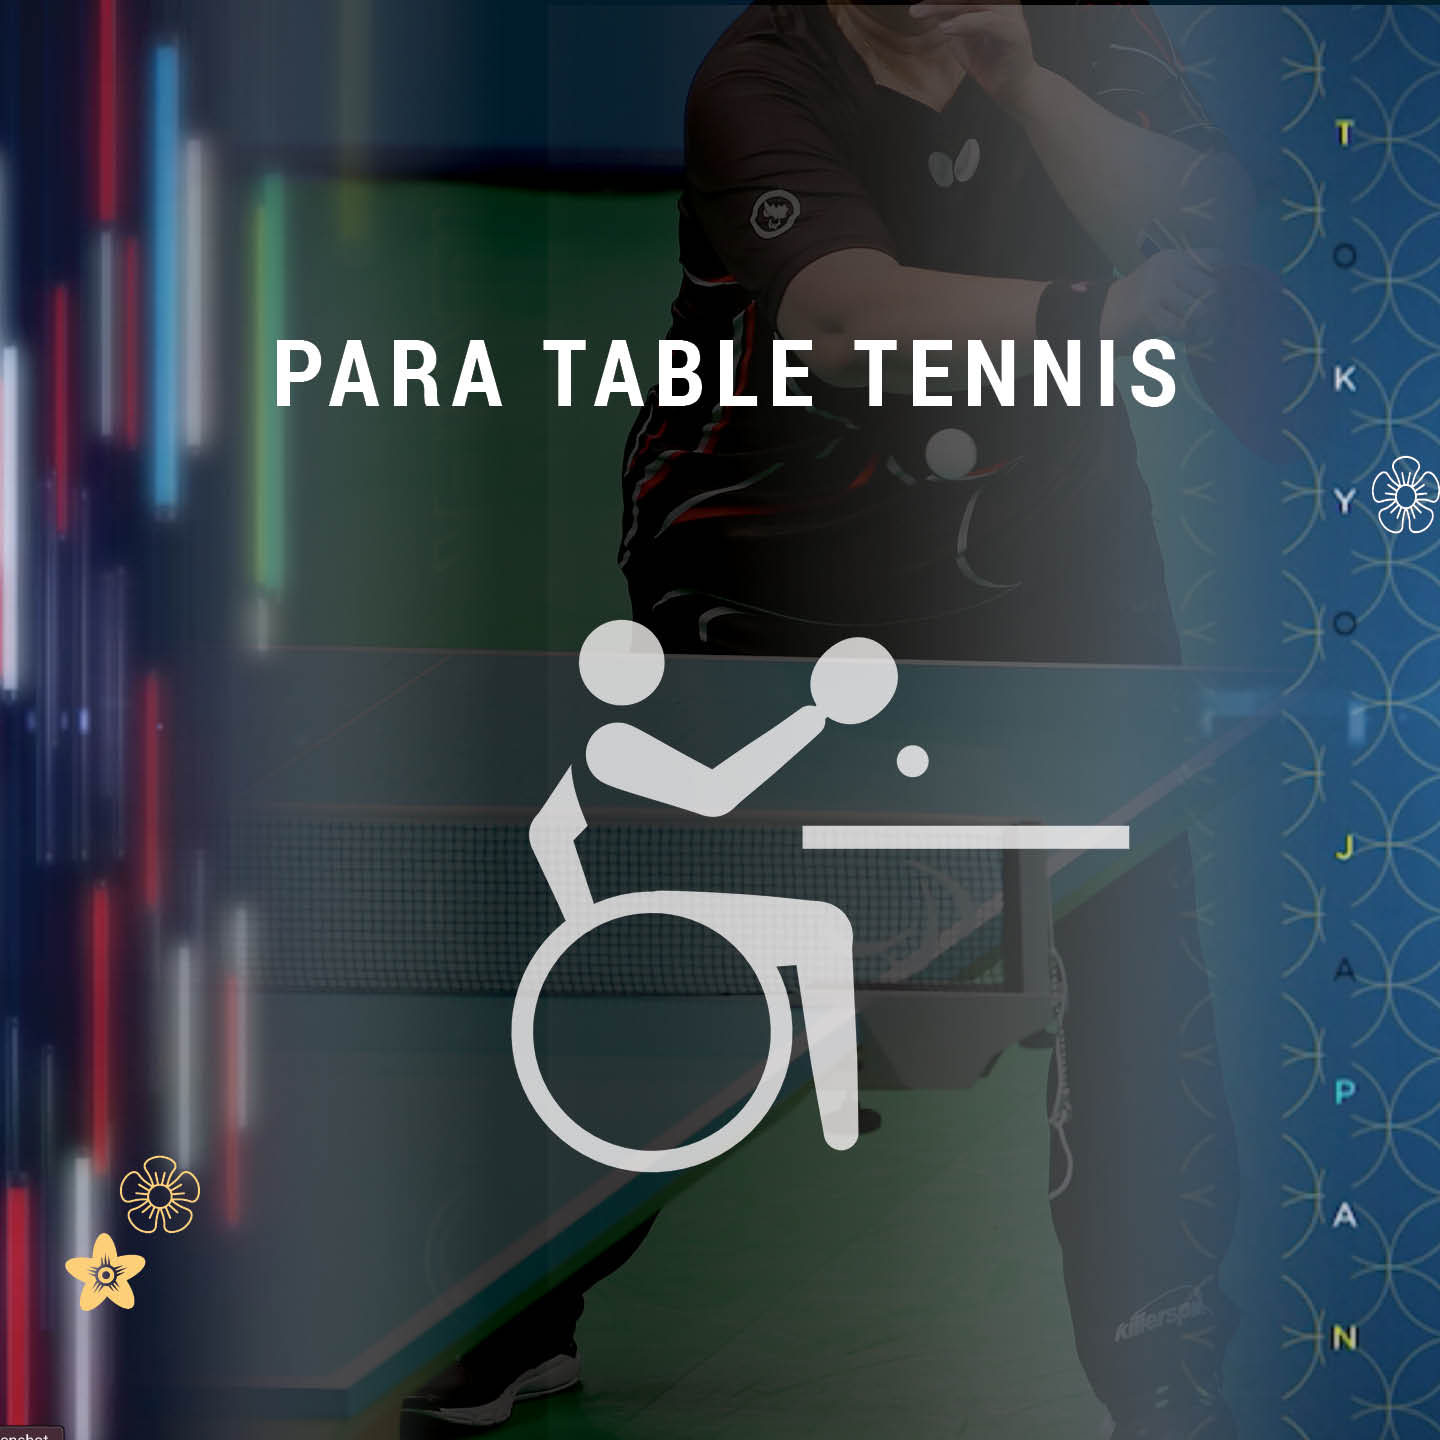 Para table tennis live stream and video on demand